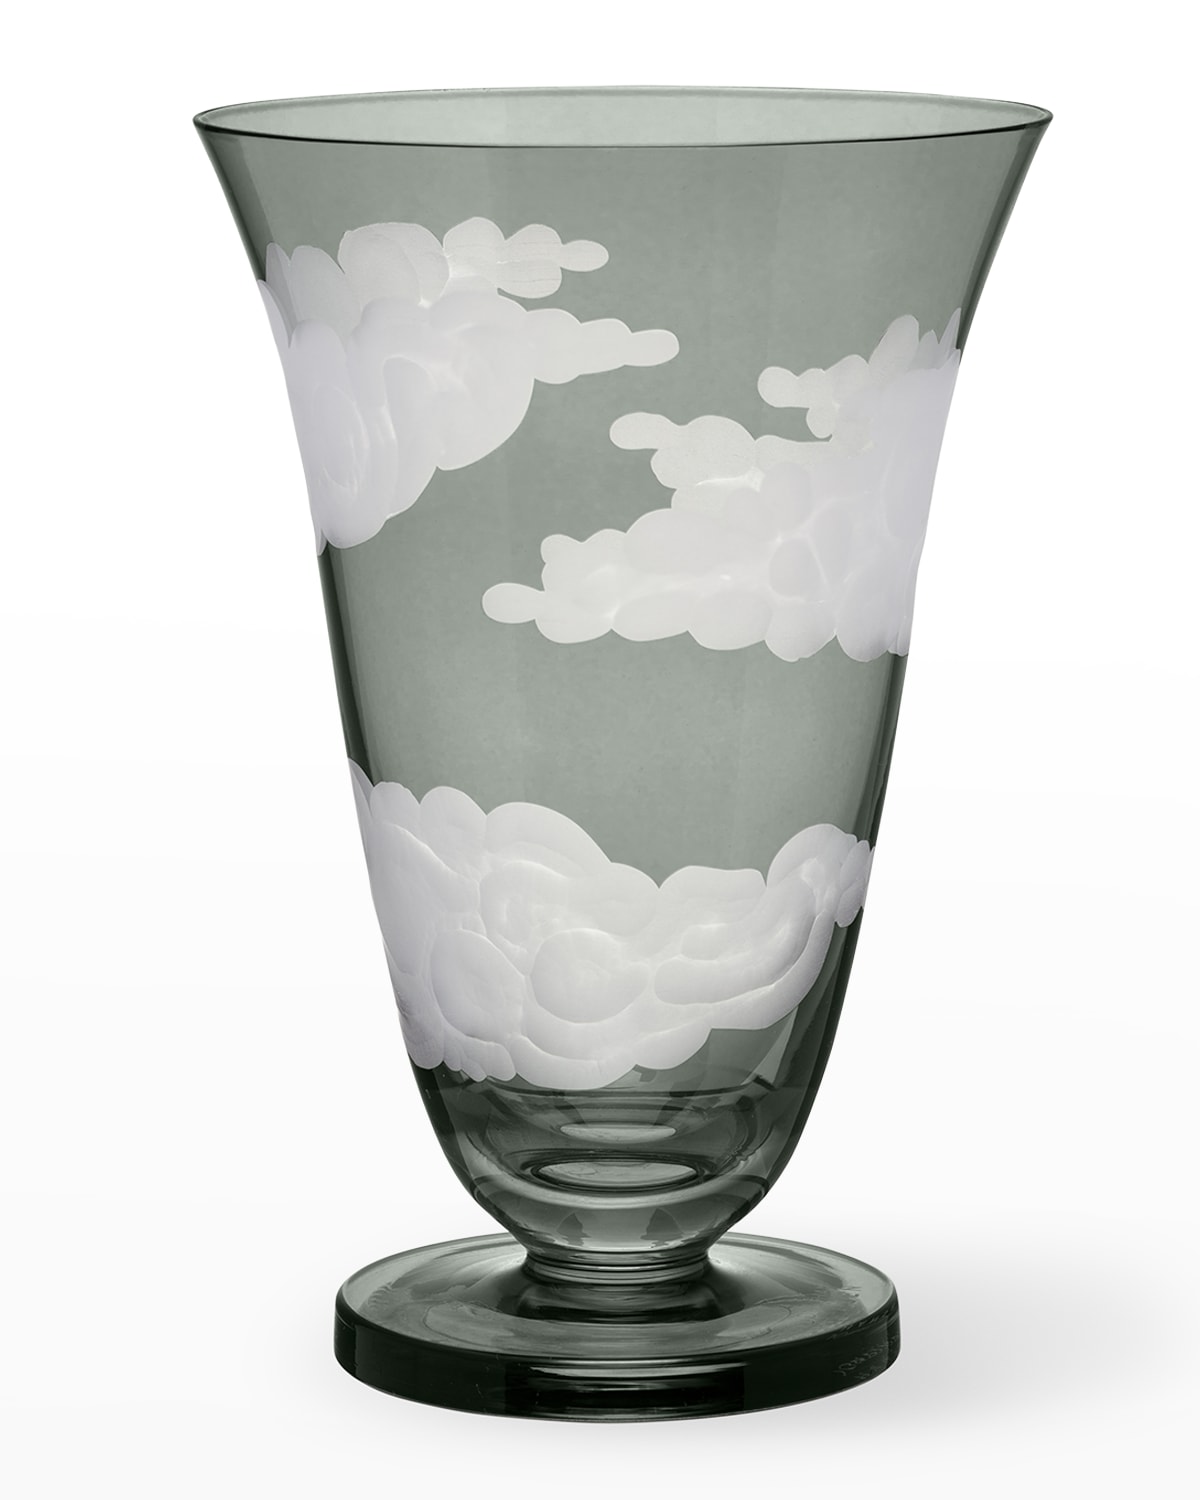 In The Clouds Stemless Champagne Flute, Gray - 8 oz.